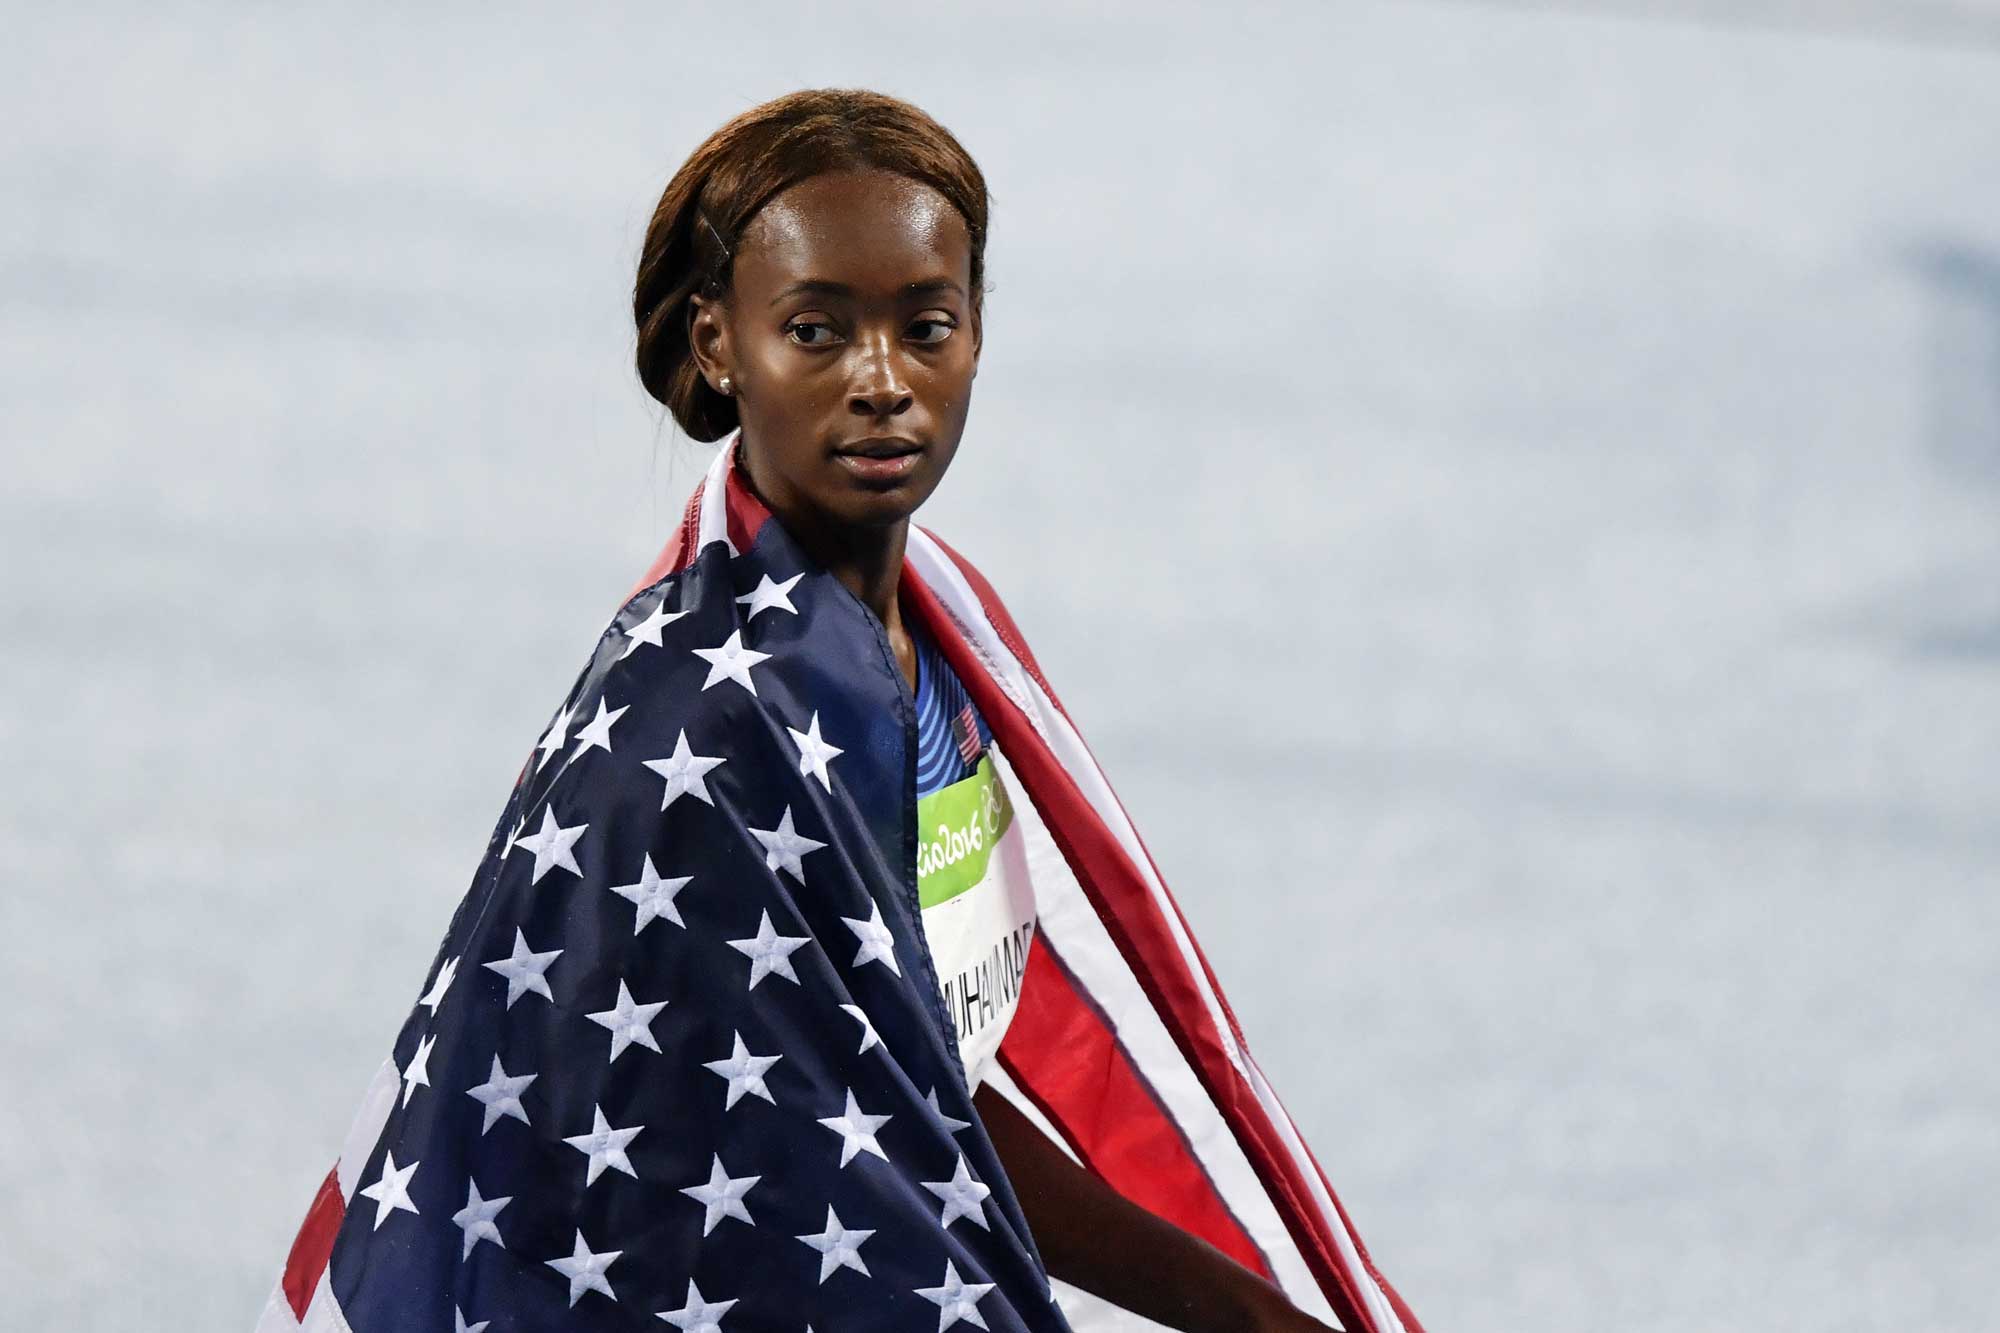 10 Things to Know About Gold Medal Athlete Dalilah Muhammad